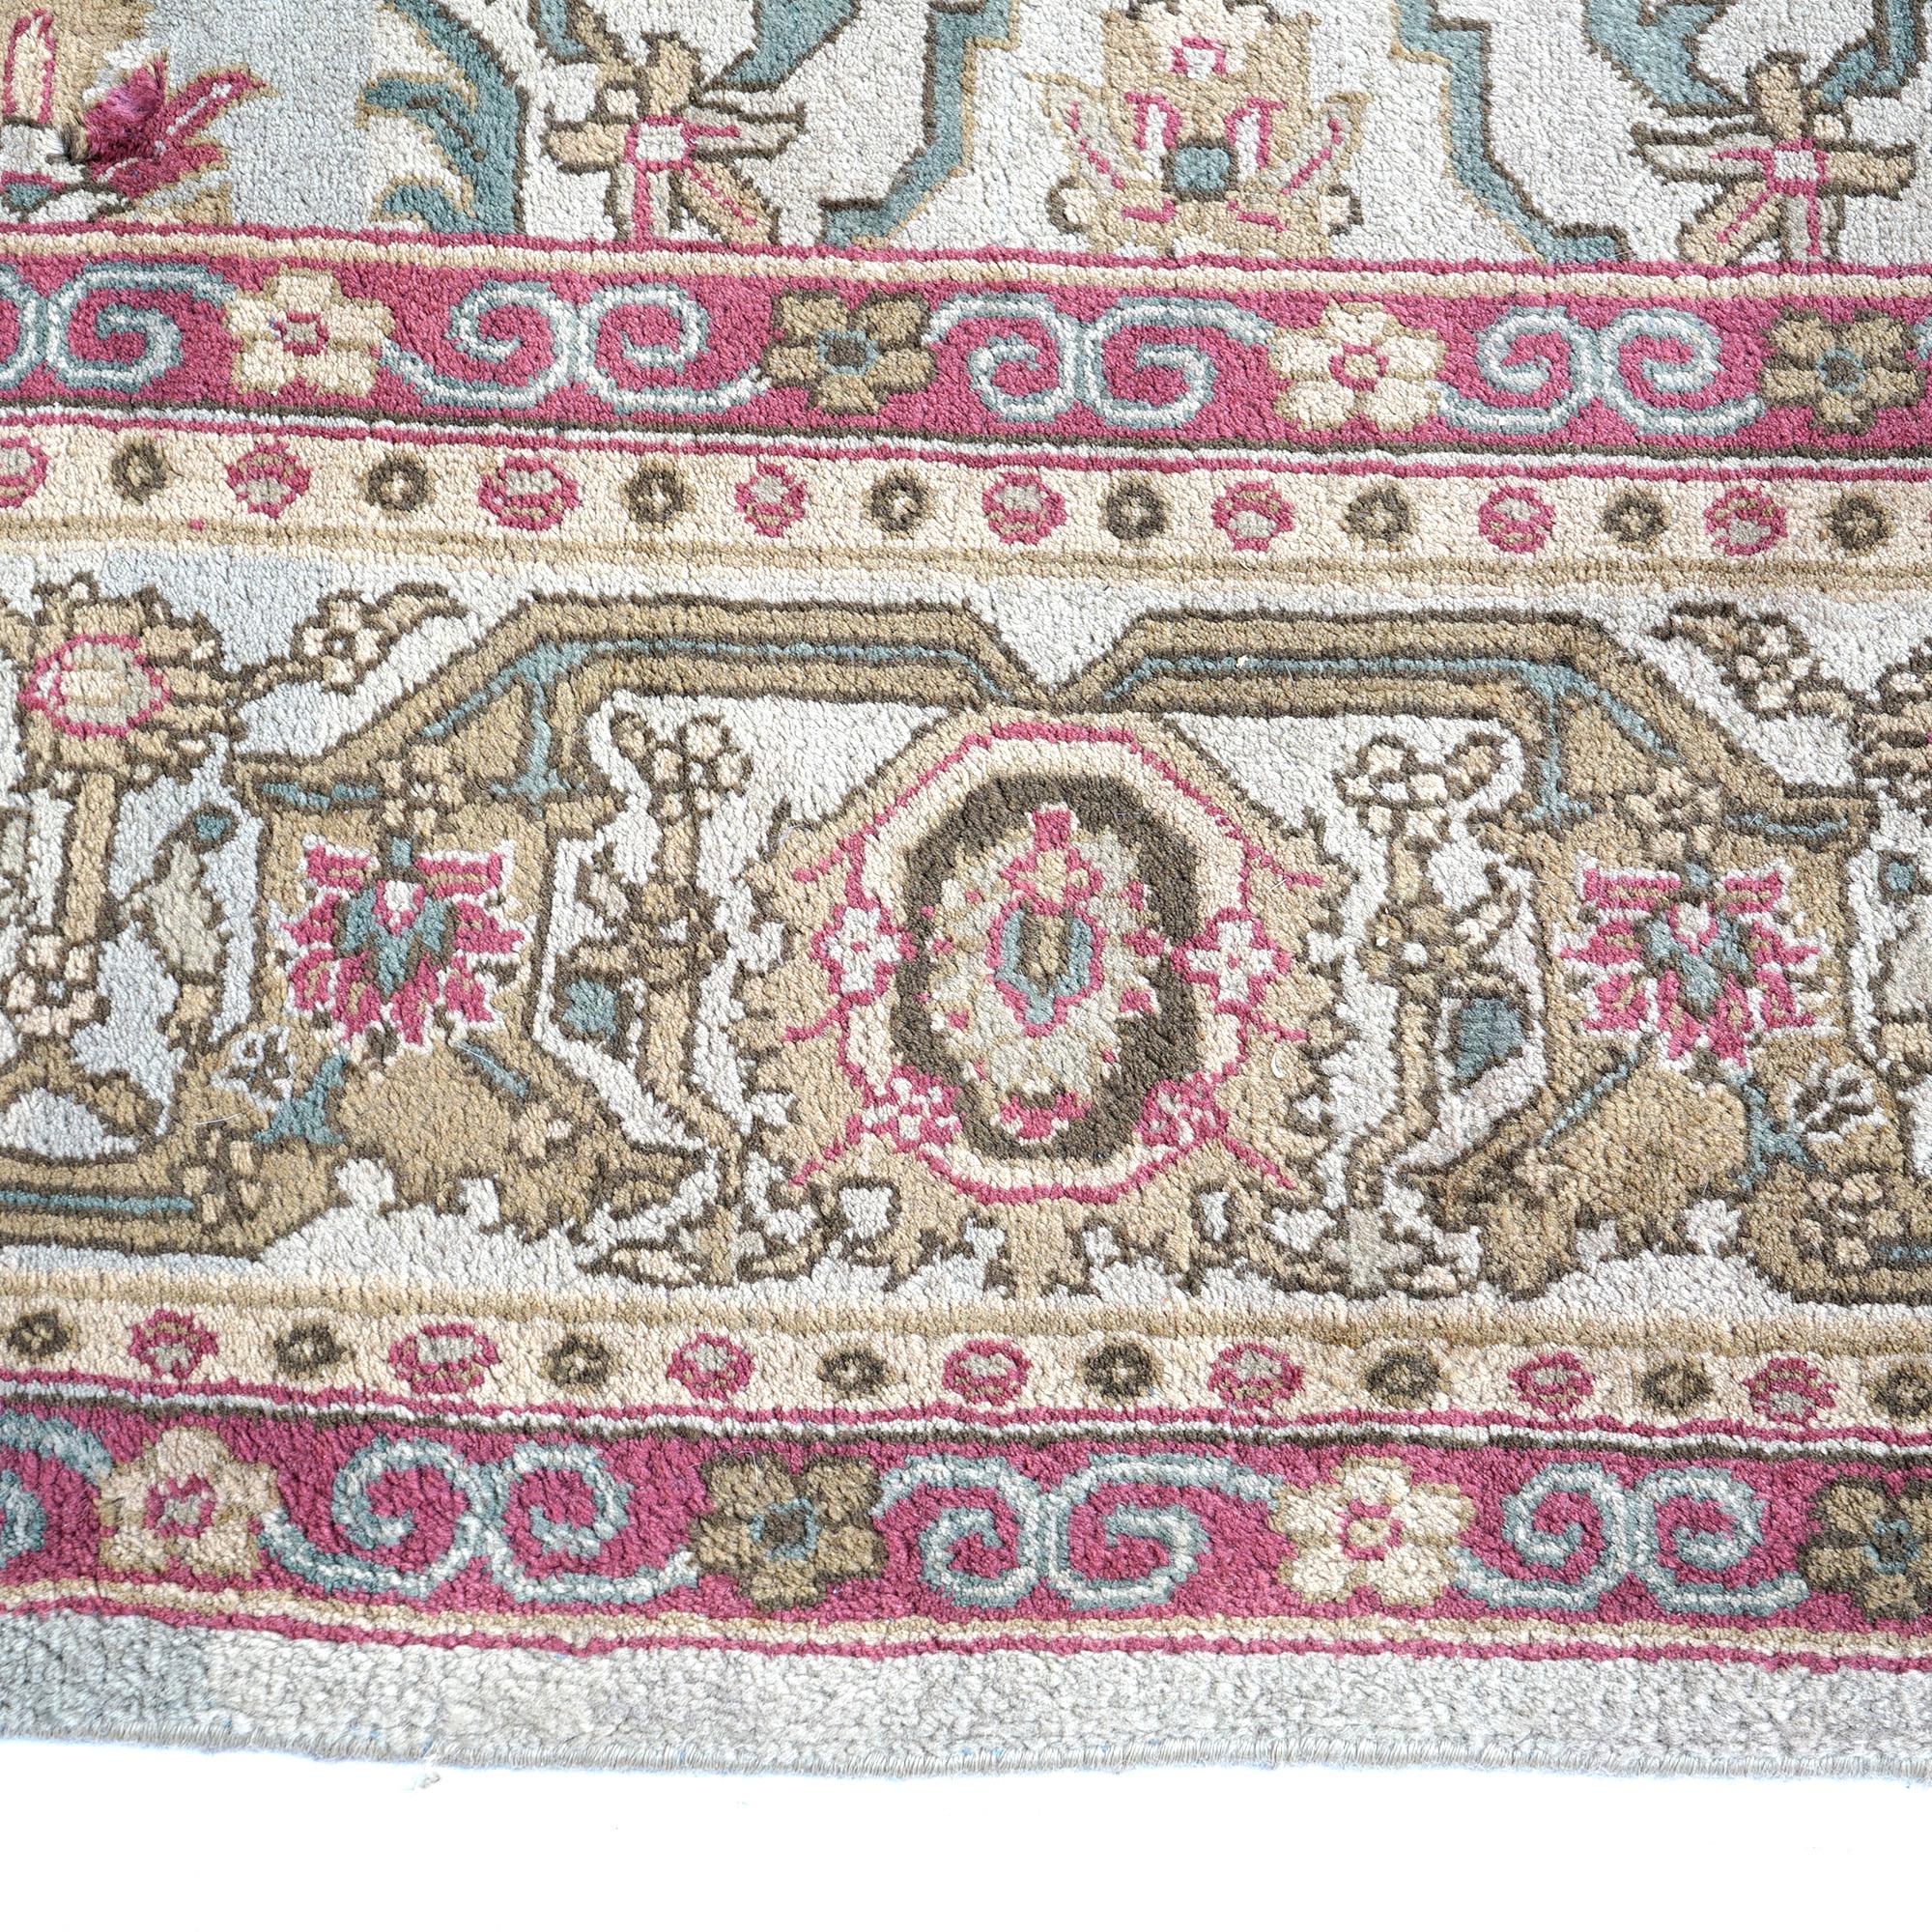 Agra Floral Oriental Wool Carpet 20th C For Sale 4